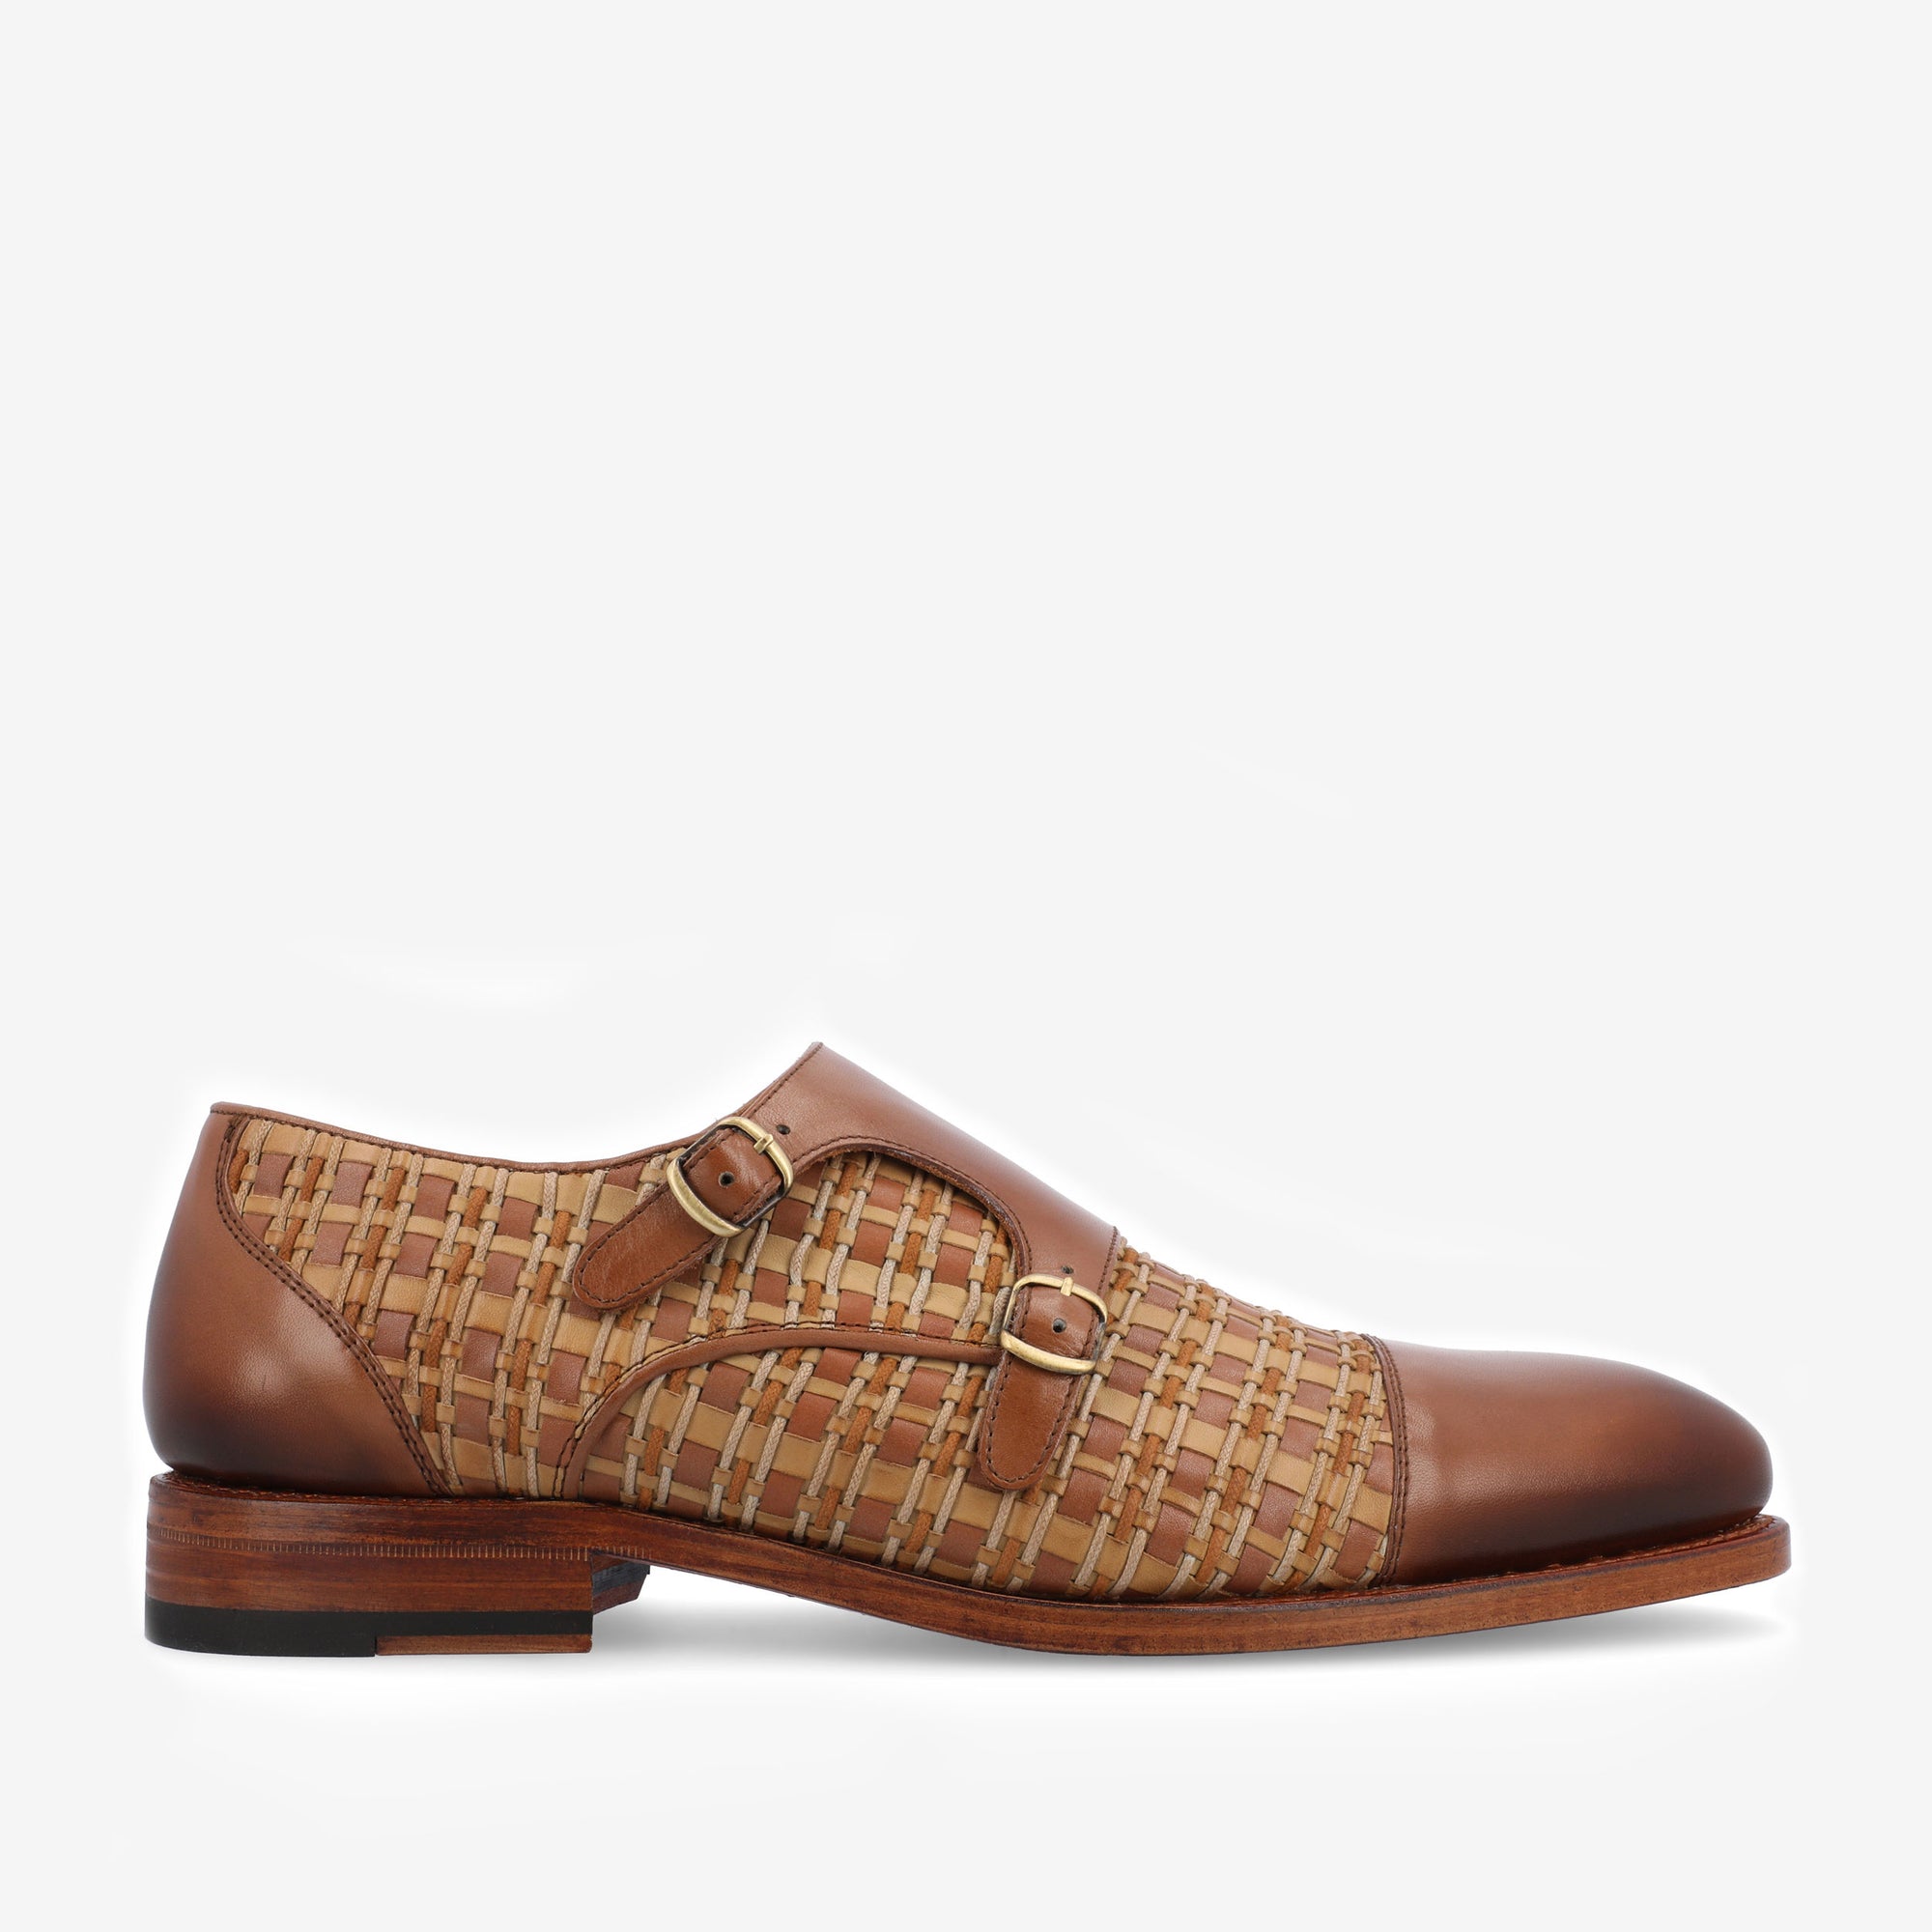 The Lucca Monk in Brown Woven